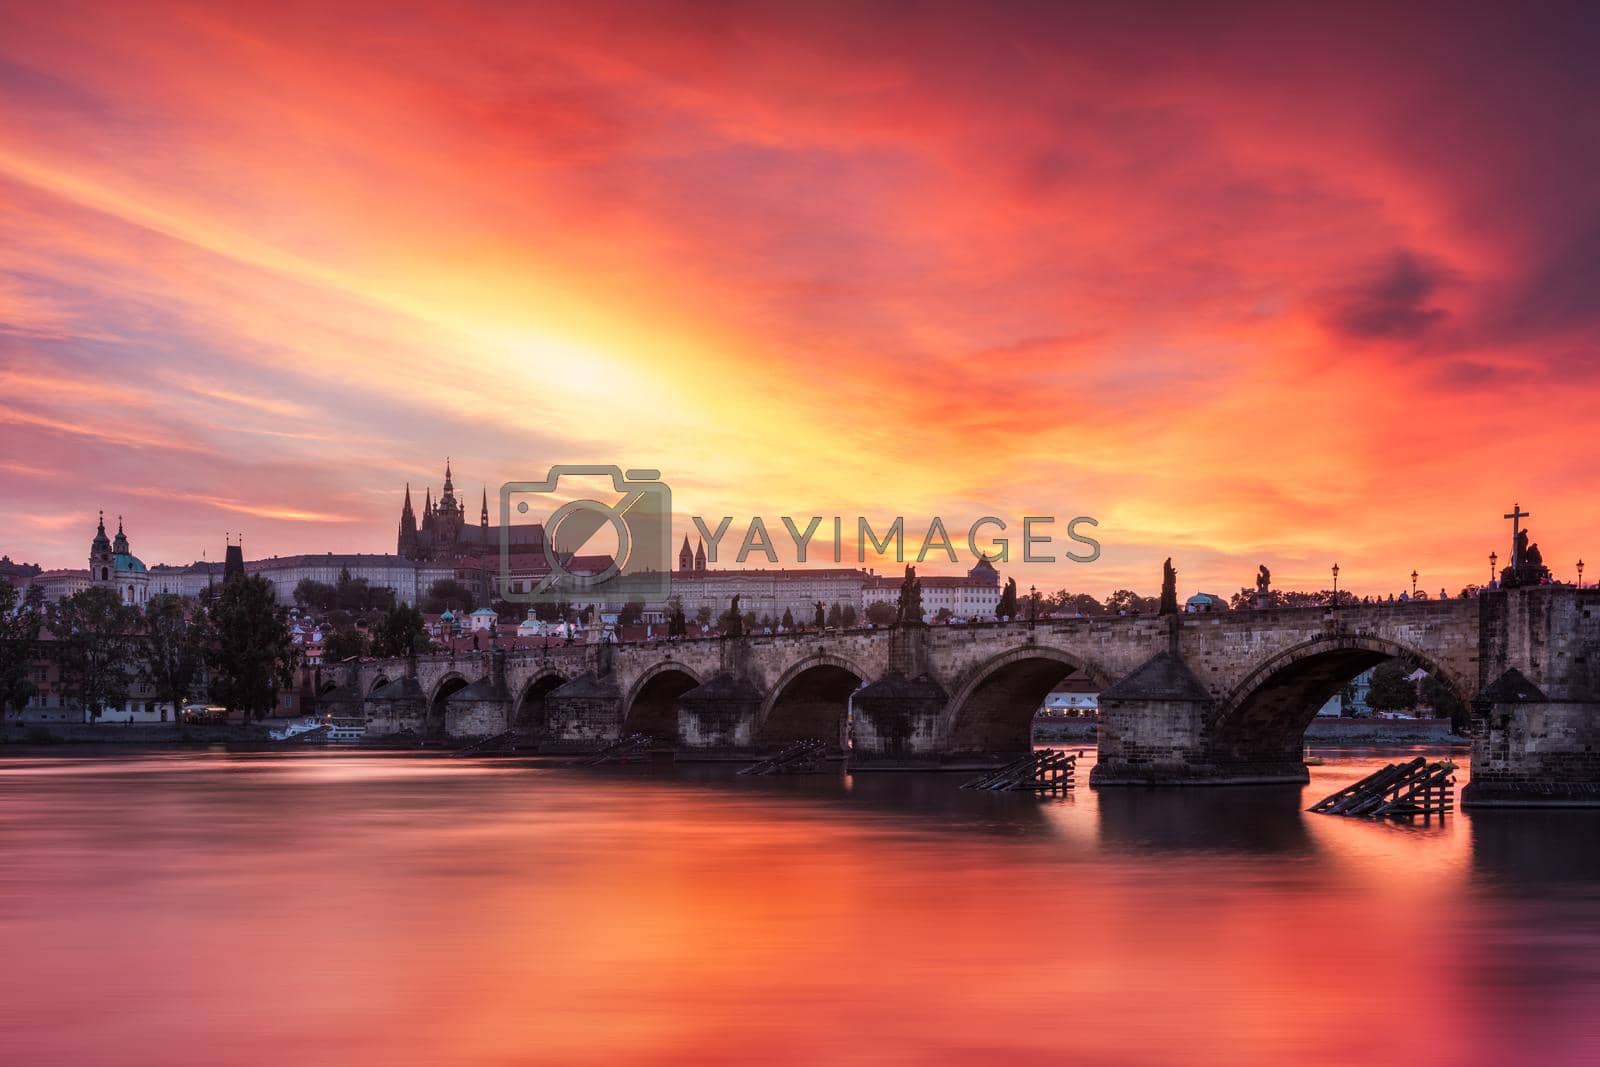 Royalty free image of Charles Bridge in Prague in Czechia. Prague, Czech Republic. Charles Bridge (Karluv Most) and Old Town Tower. Vltava River and Charles Bridge. Concept of world travel, sightseeing and tourism. by DaLiu